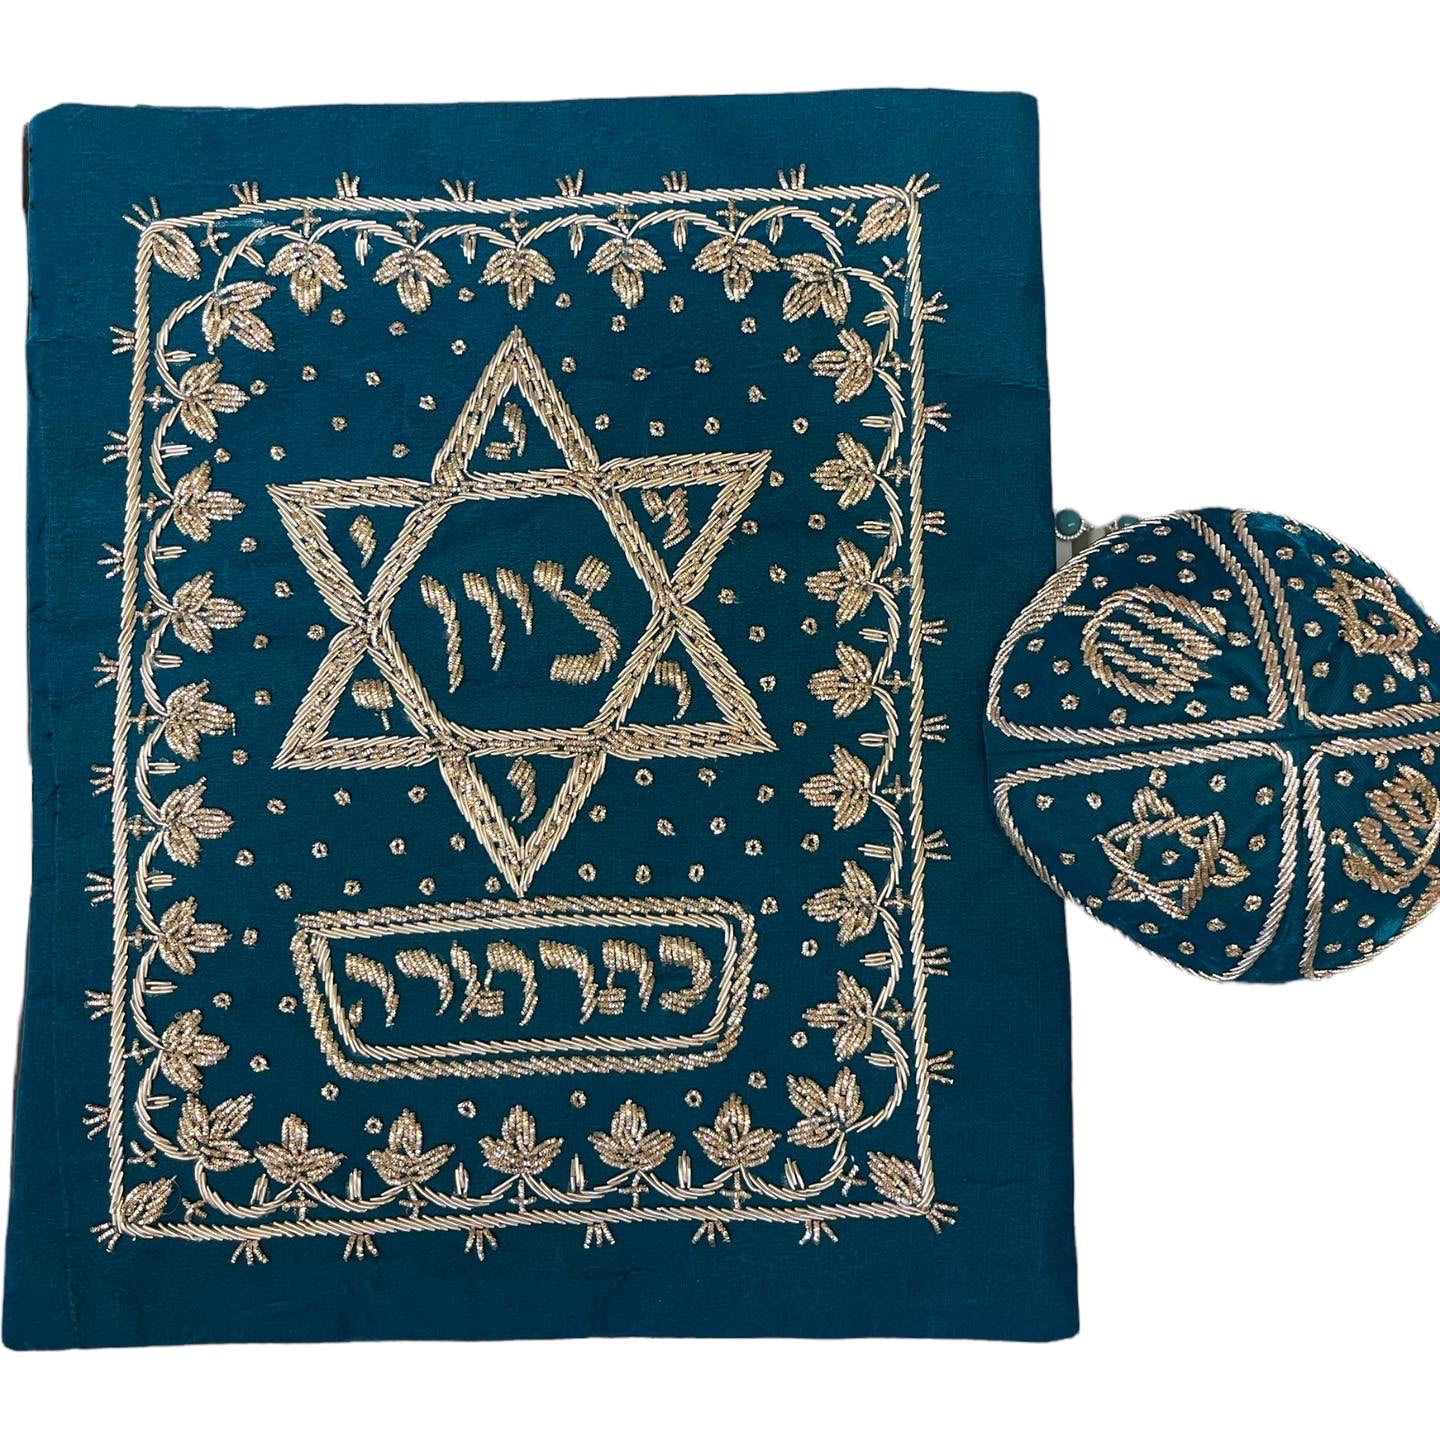 Original Persian groom matching kippah and Tallit bag set. BOTH sides of the Talit bag Handmade crafted on a Rich soft velvet